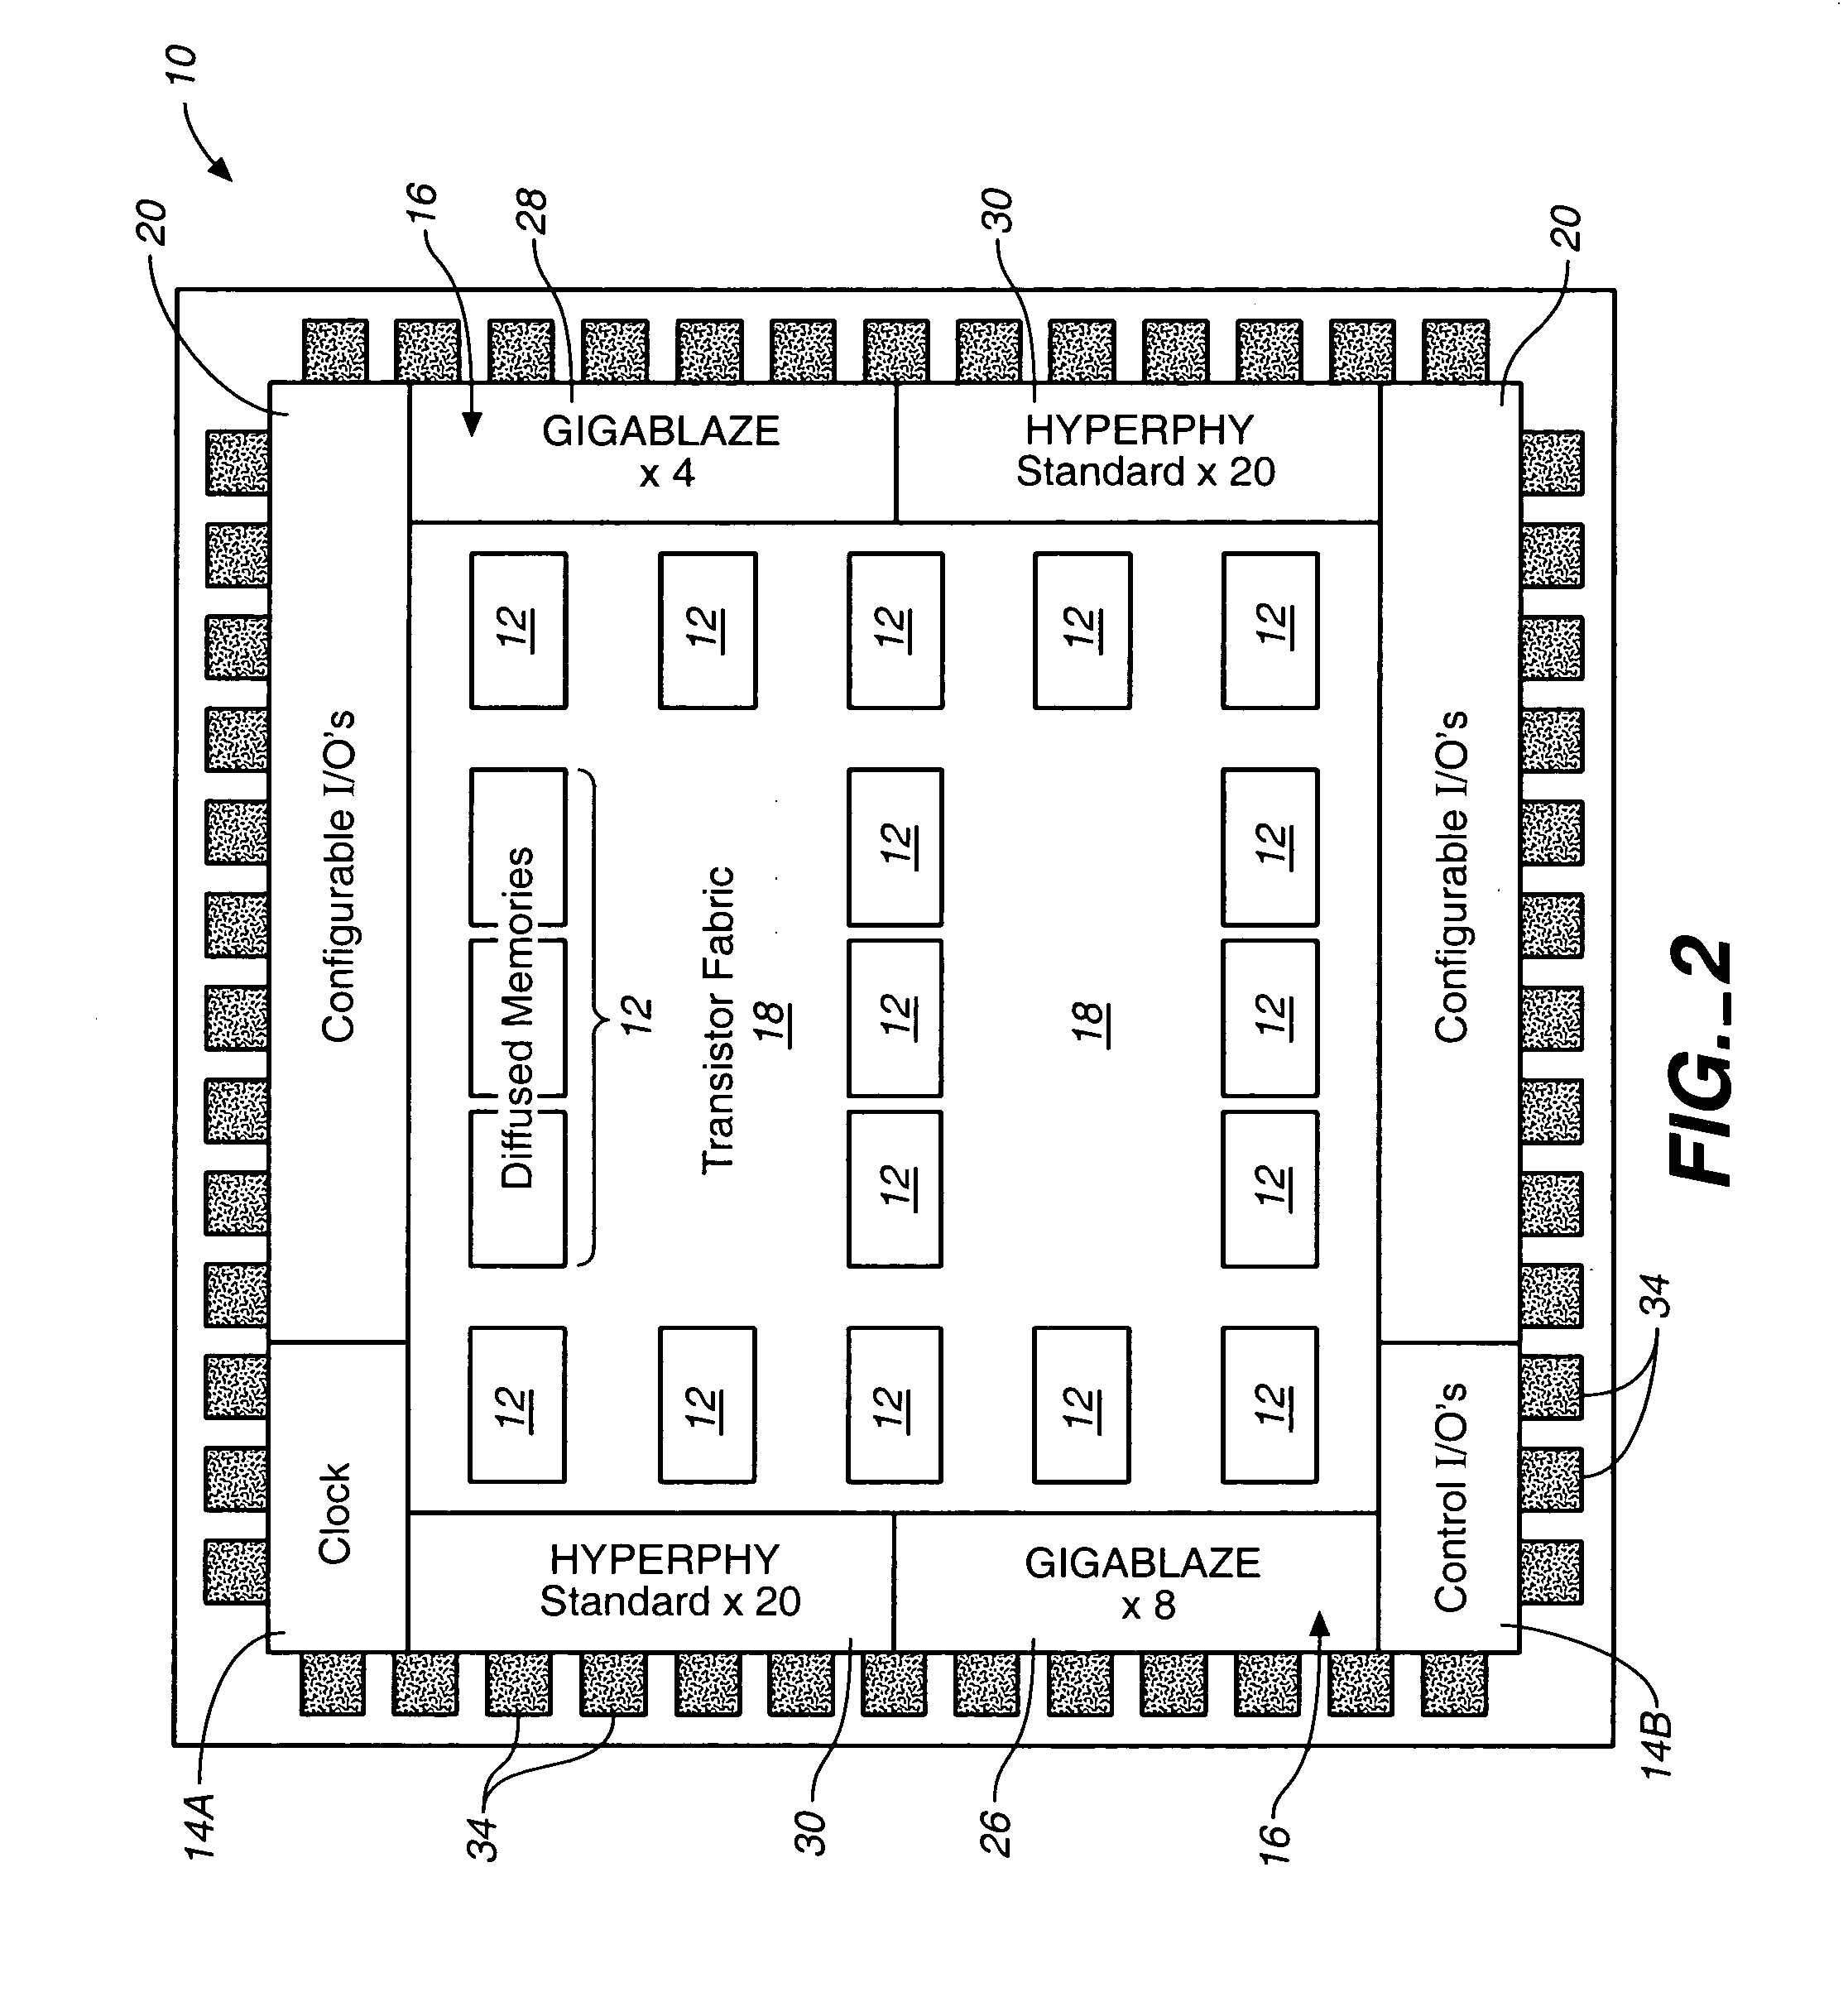 System and method for mapping logical components to physical locations in an integrated circuit design environment